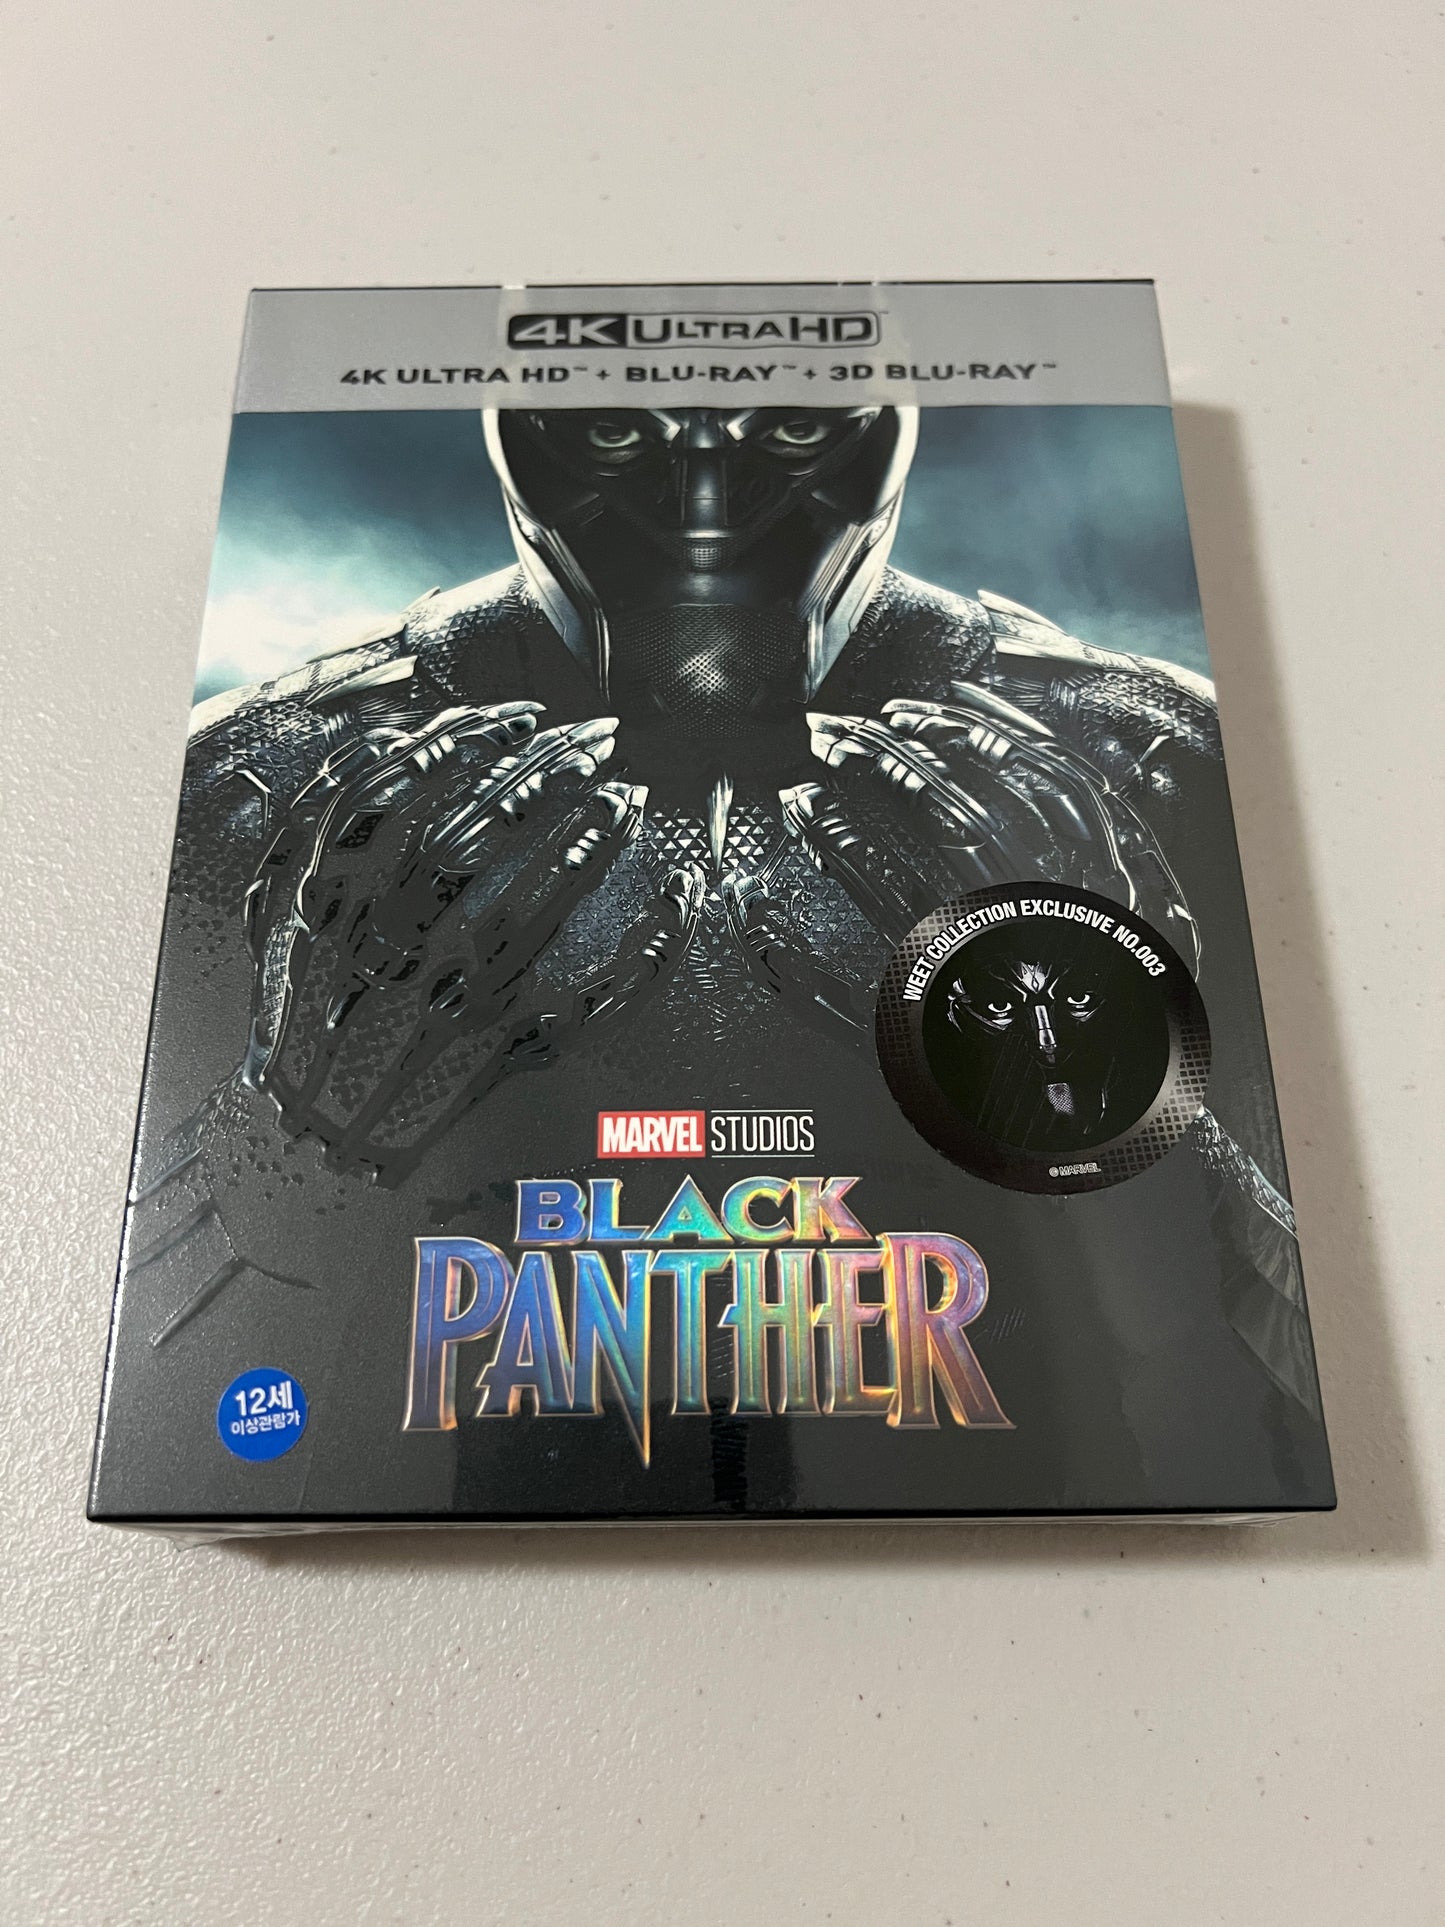 Black Panther (4K UHD + 3D + 2D Blu-Ray) Steelbook WEET Collection Full Slip A1